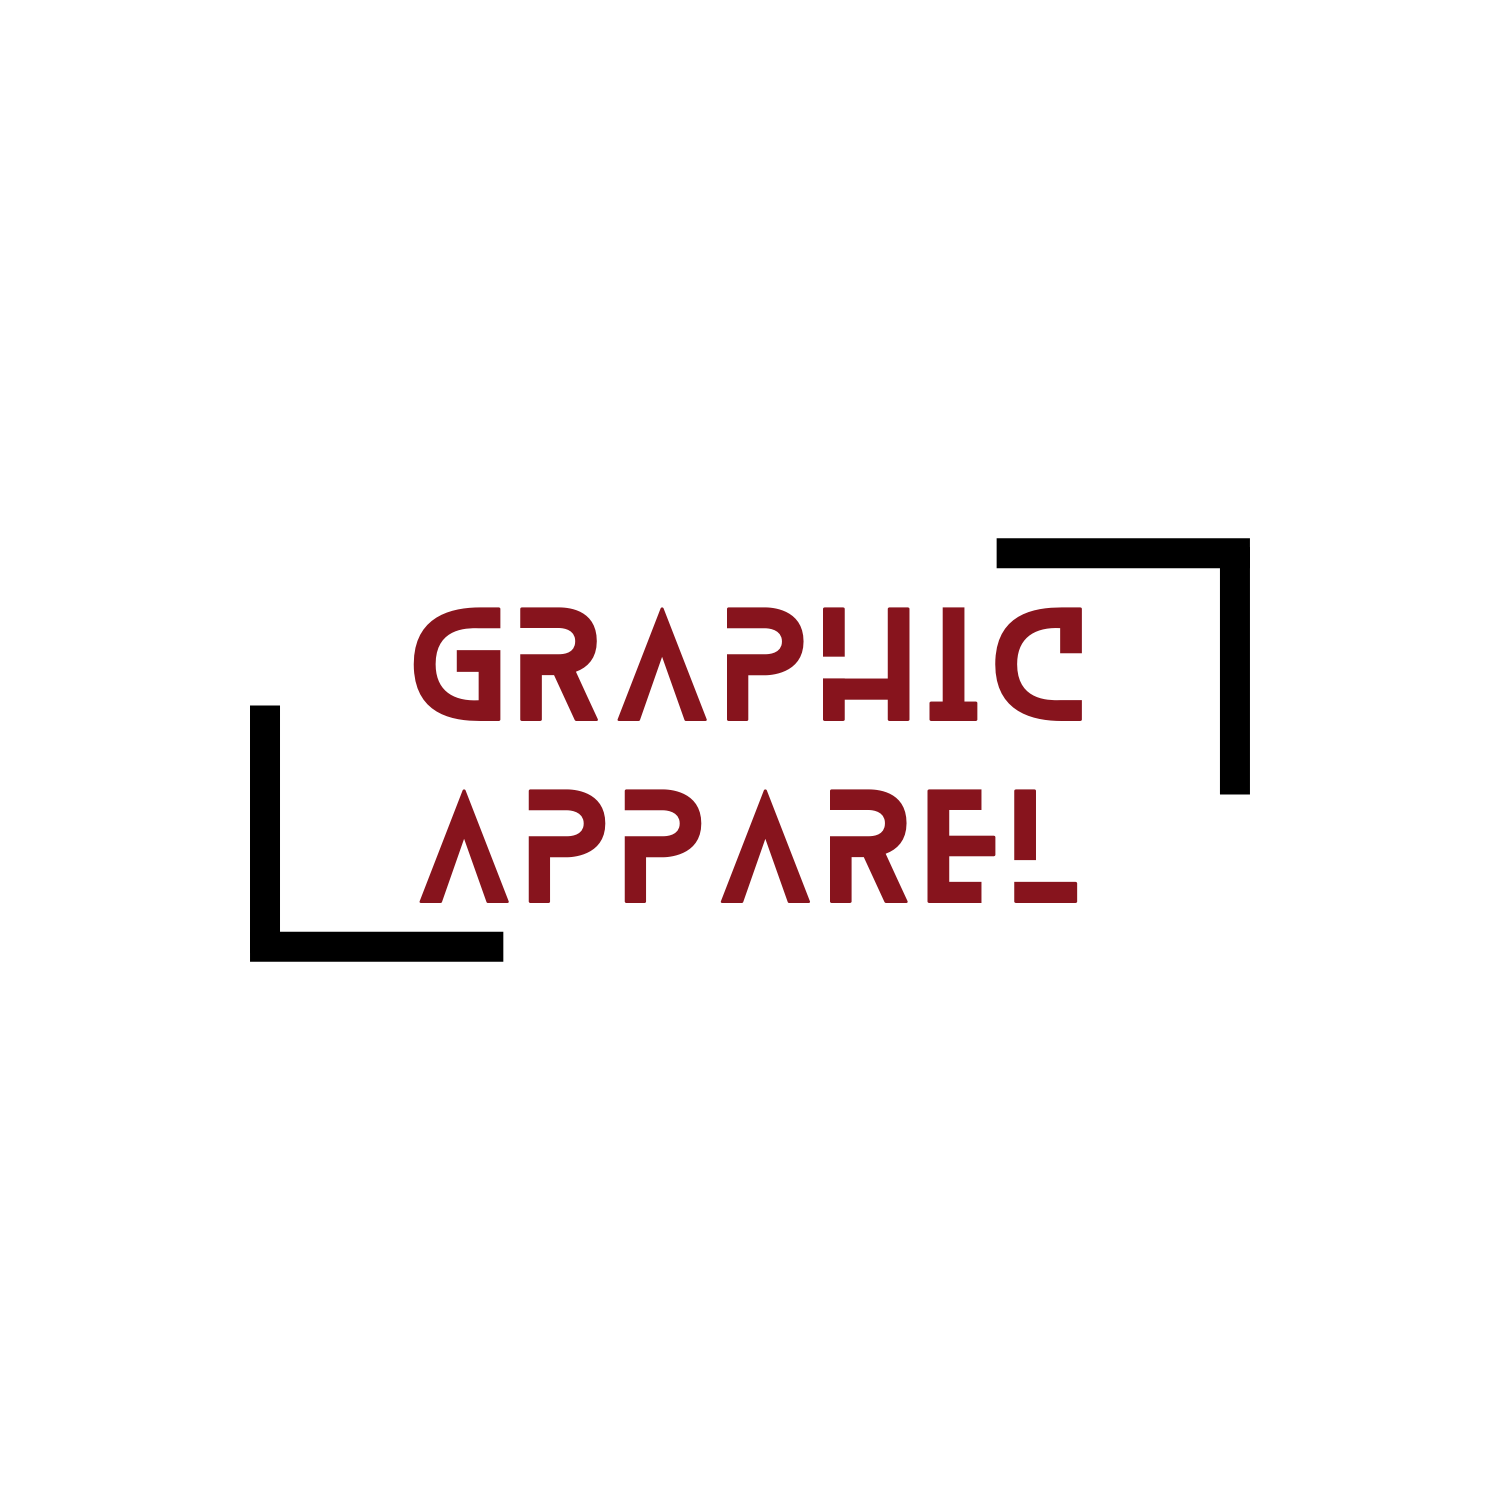 Graphic Apparel Collection